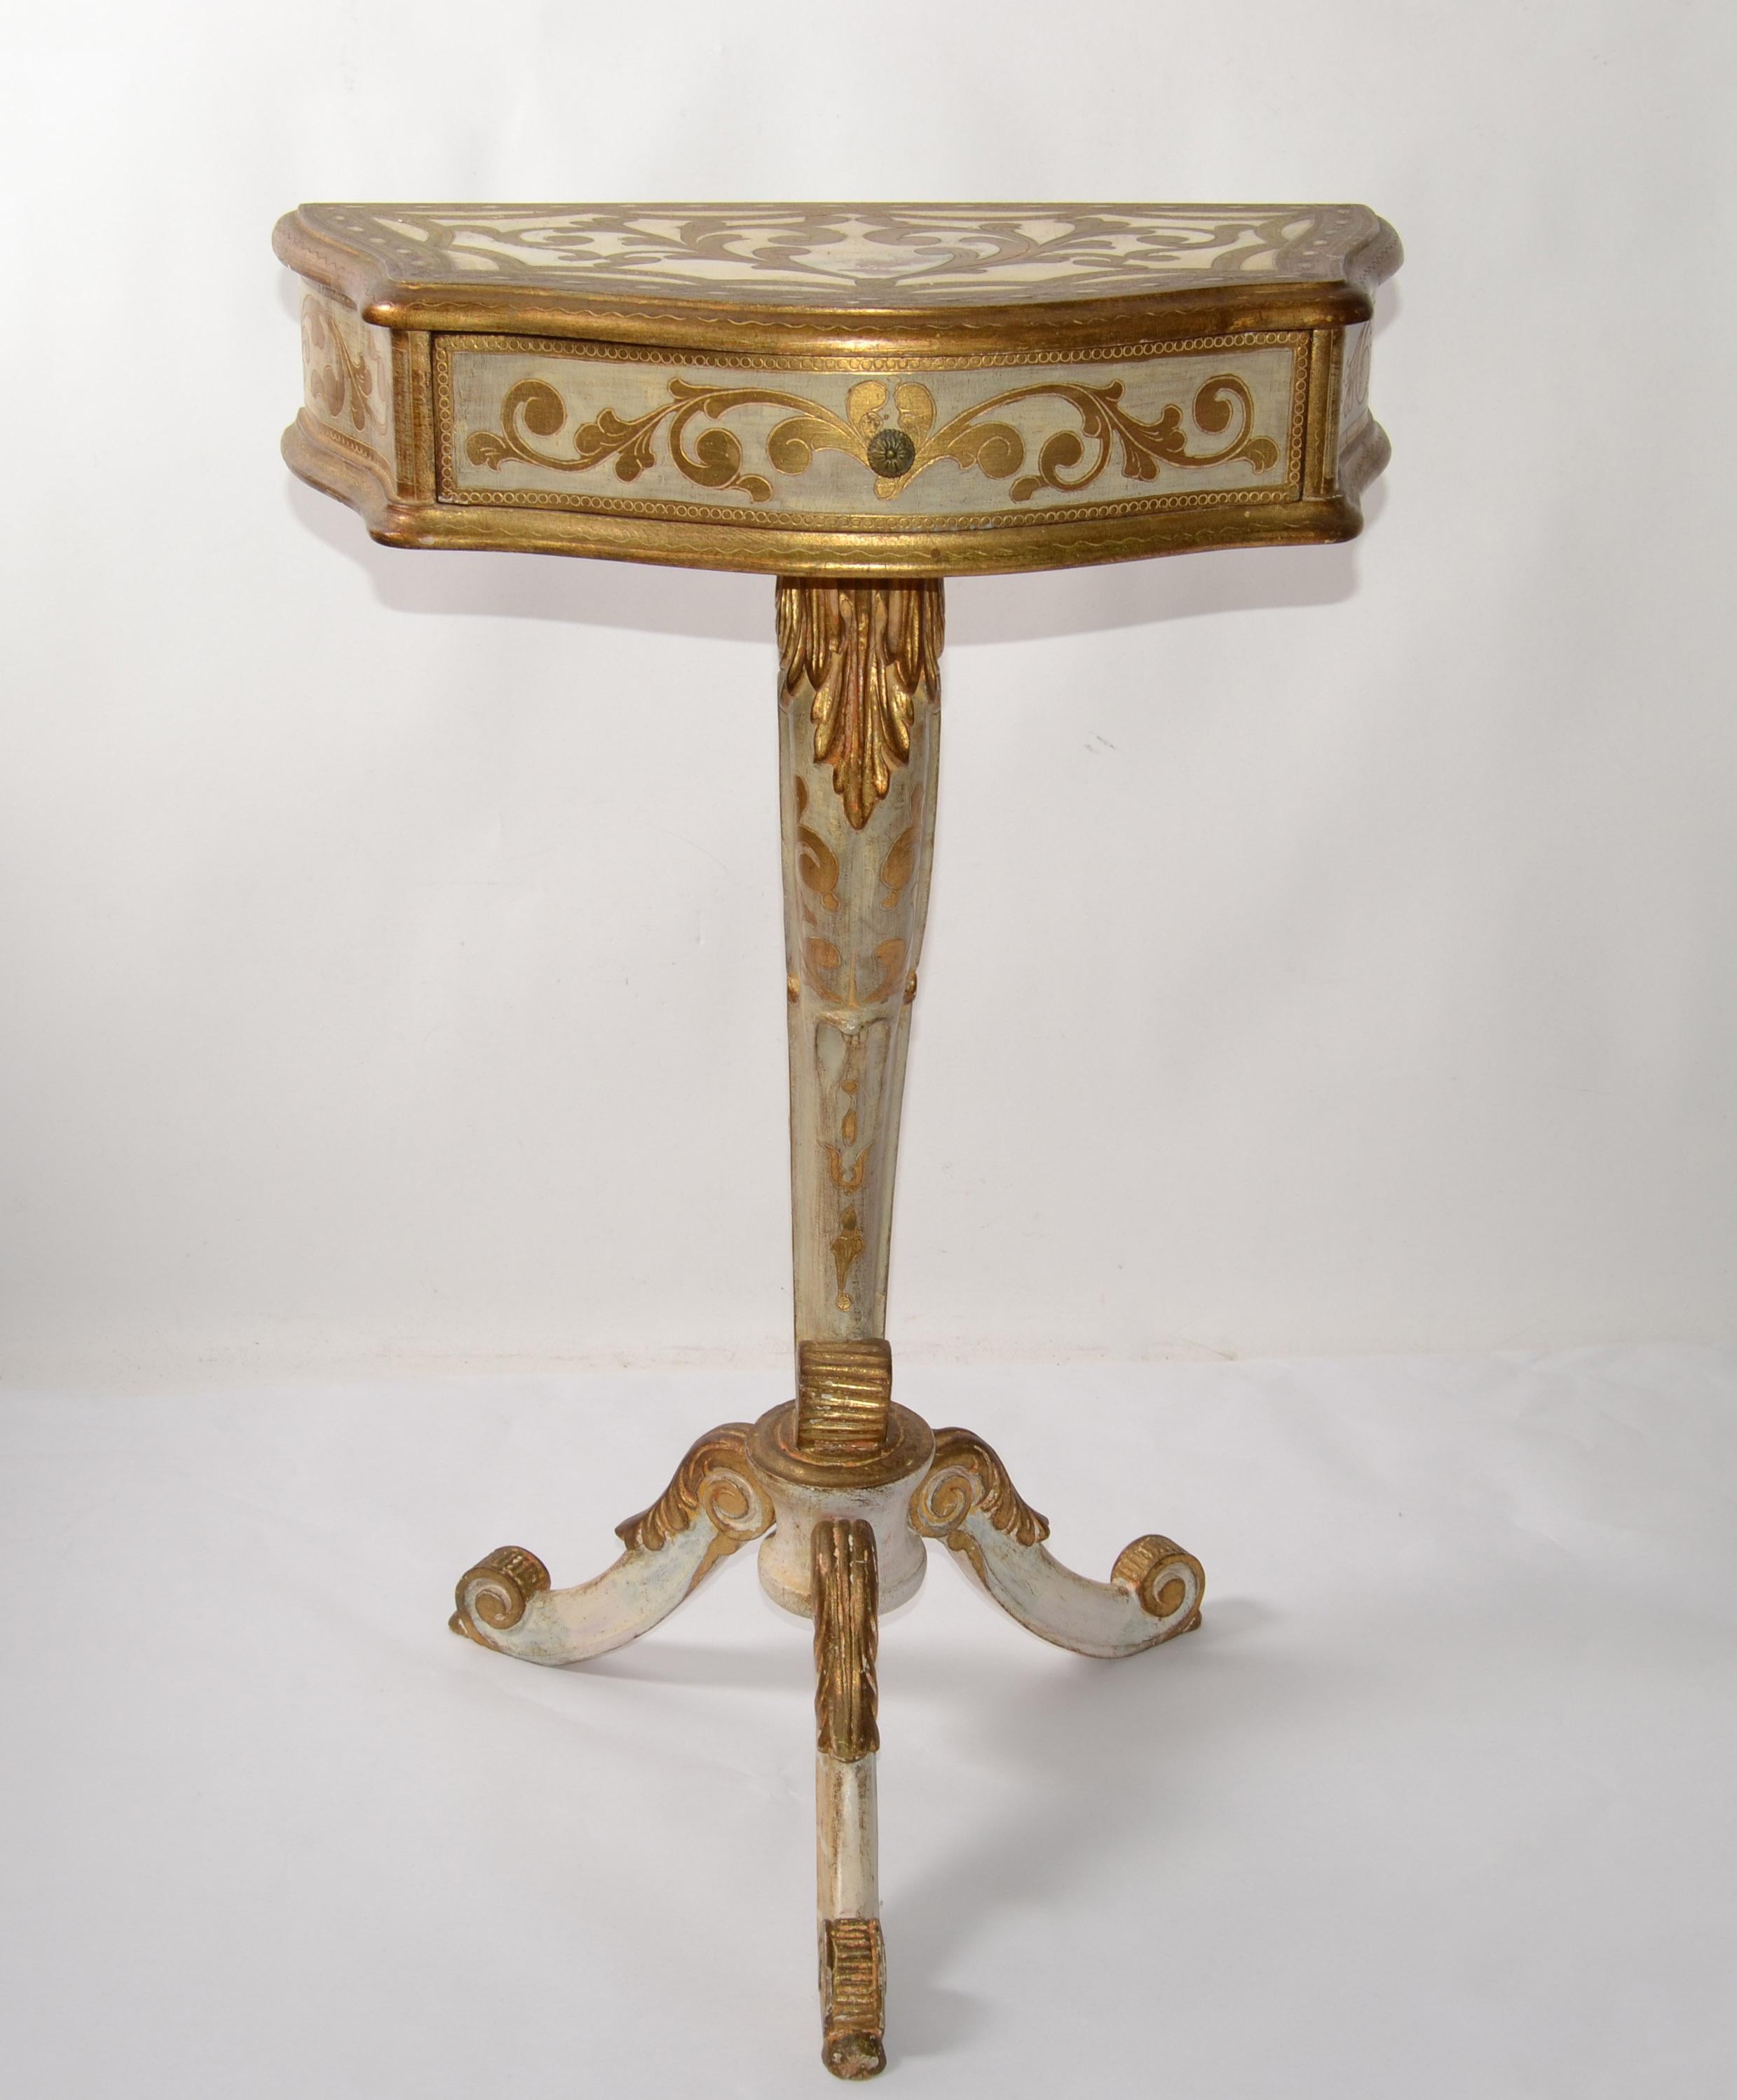 This most elegant and charming Italian 20th century Florentine giltwood side table. The rectangle top side table is raised by three elegantly curved legs with fine scrolled feet and stunning palmette designs. 
The tusk shaped central support